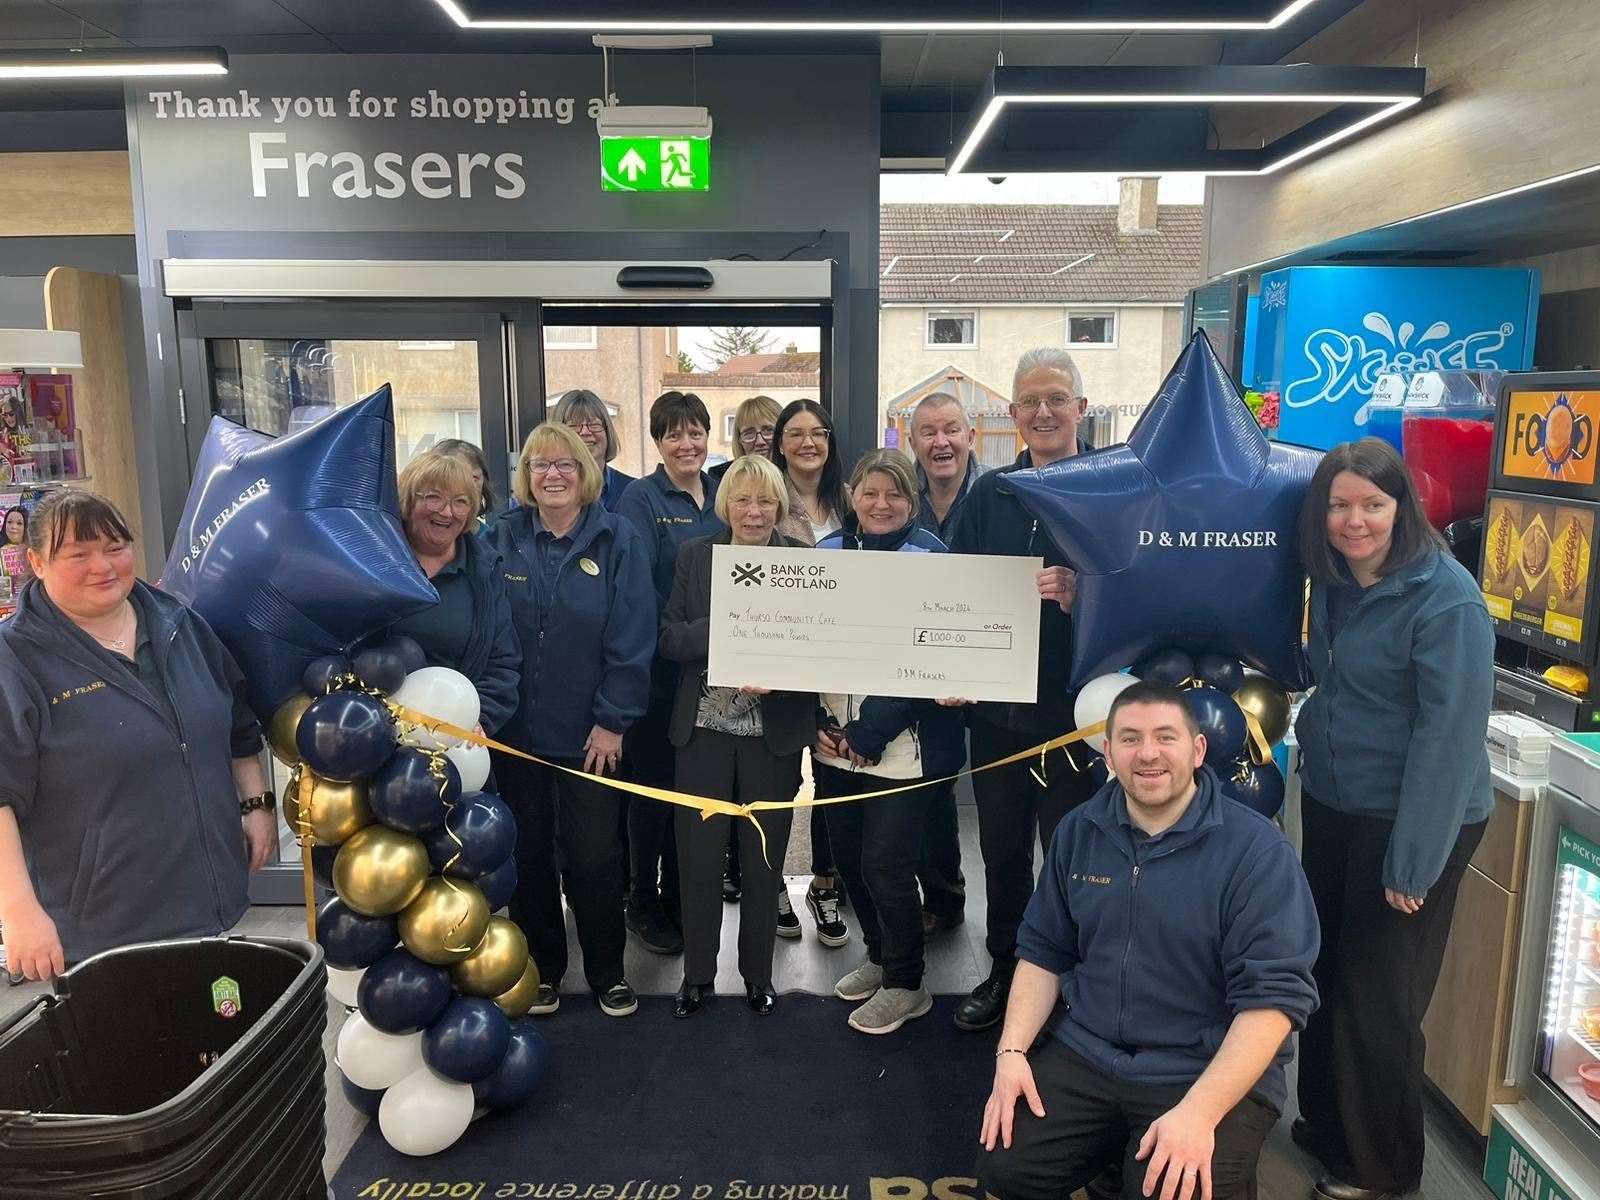 Some of the team at the grand opening of the refurbished D&M Fraser store in Castlegreen Road, Thurso.